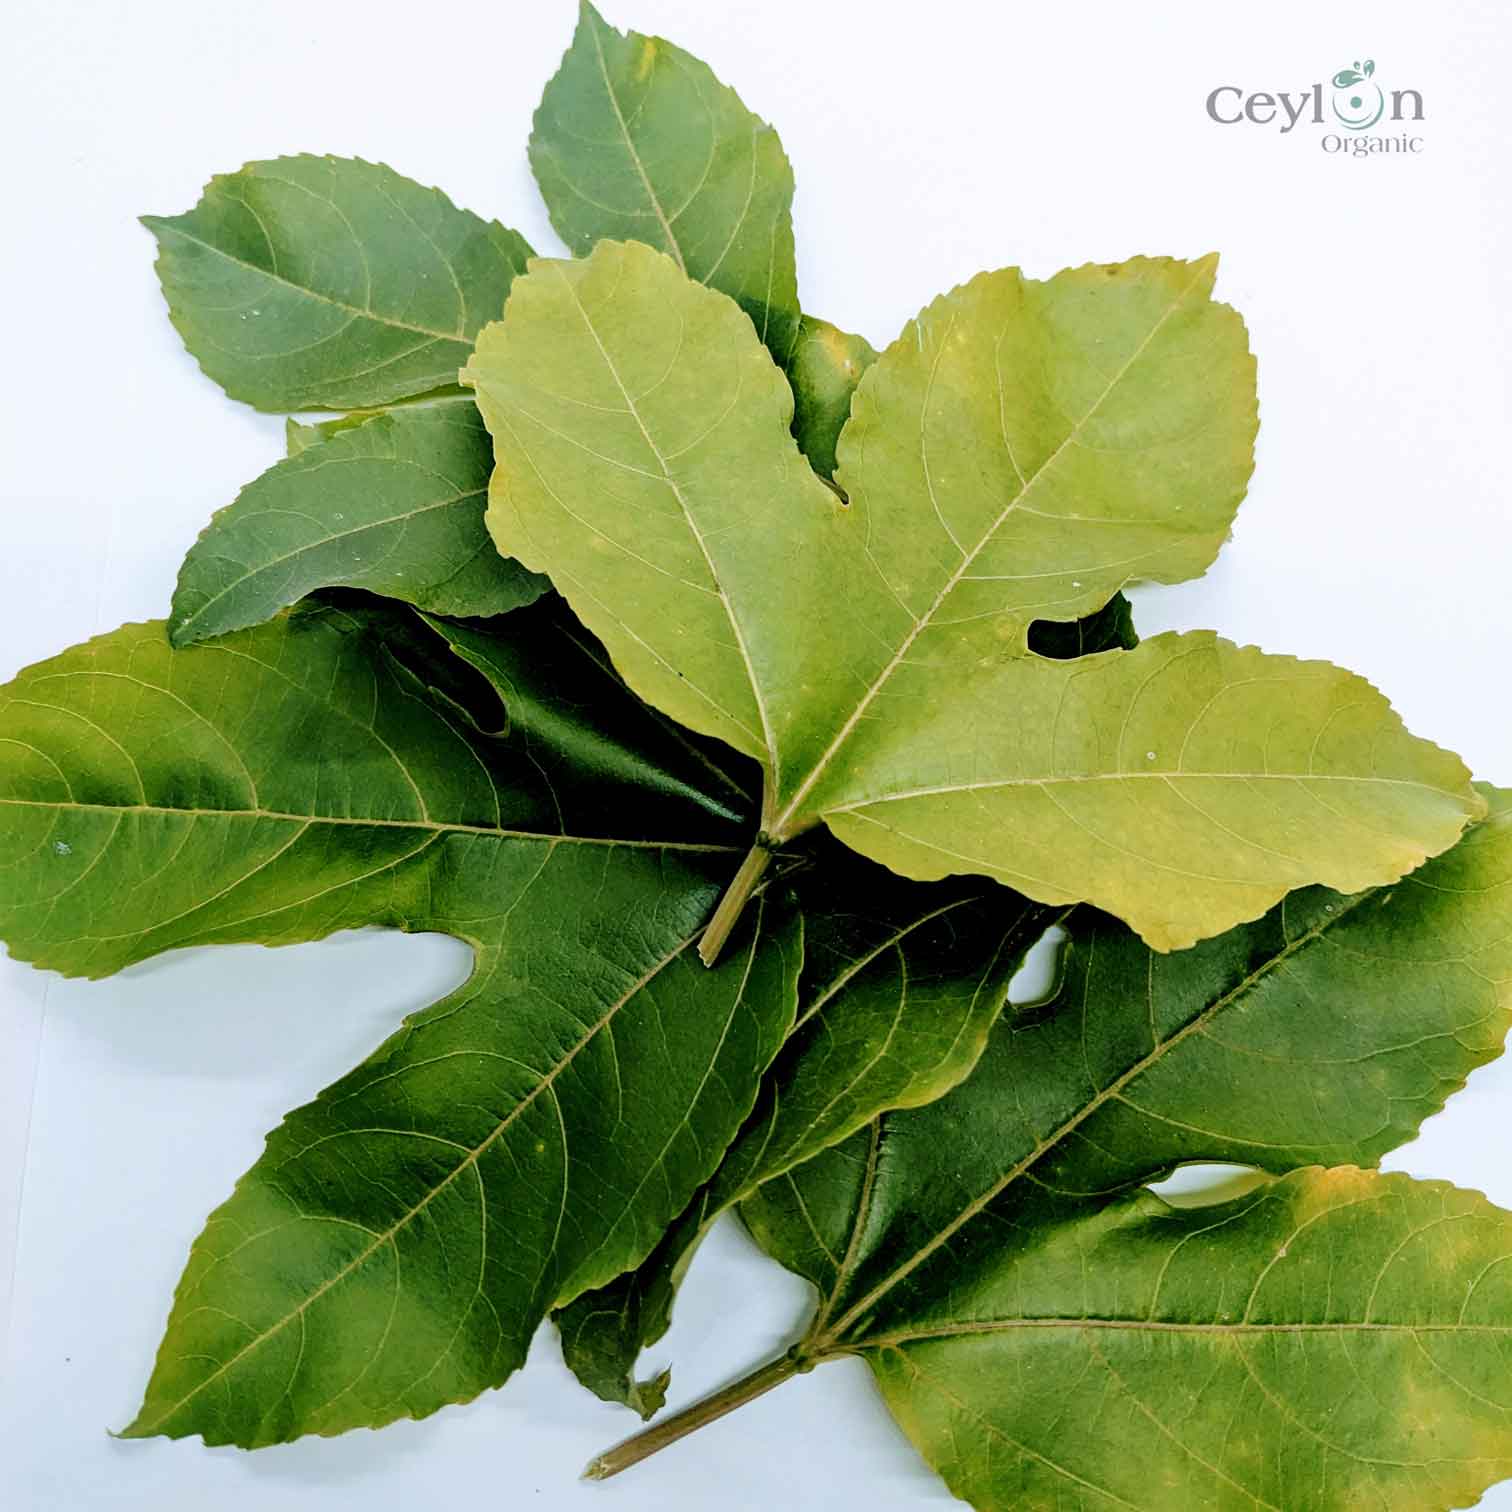 500+ Passion Fruit,Dried Passion Fruit Leaves,Dried Natural Passion Fruit Leaves | Ceylon organic-4